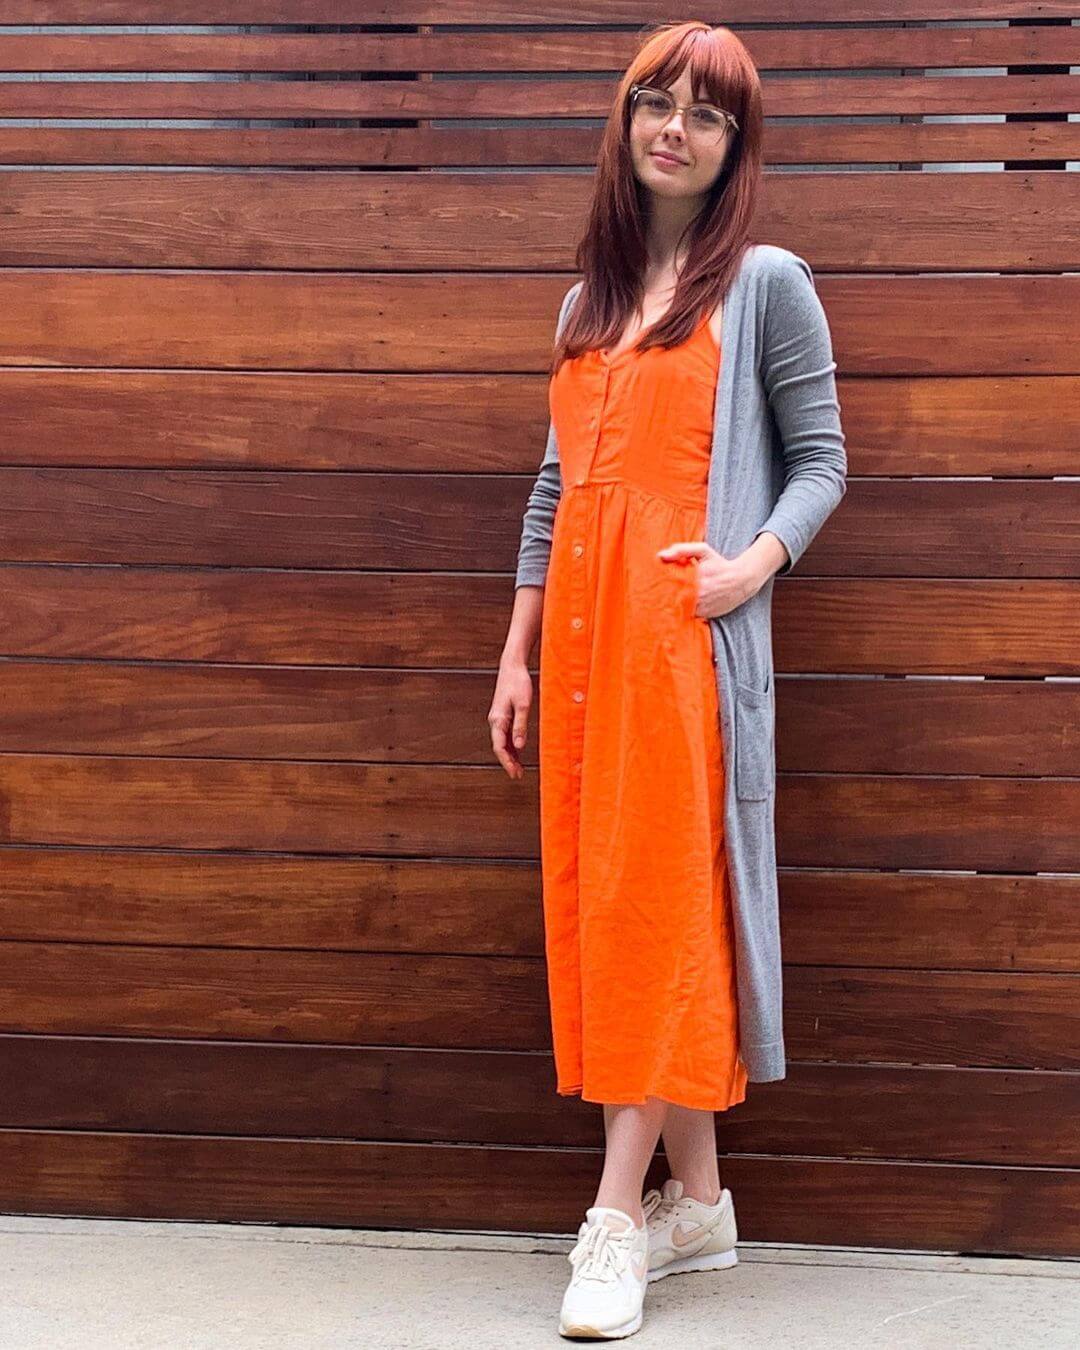 Galadriel Stineman In An Orange Buttoned Long Dress With Grey Long Shrug Outfit